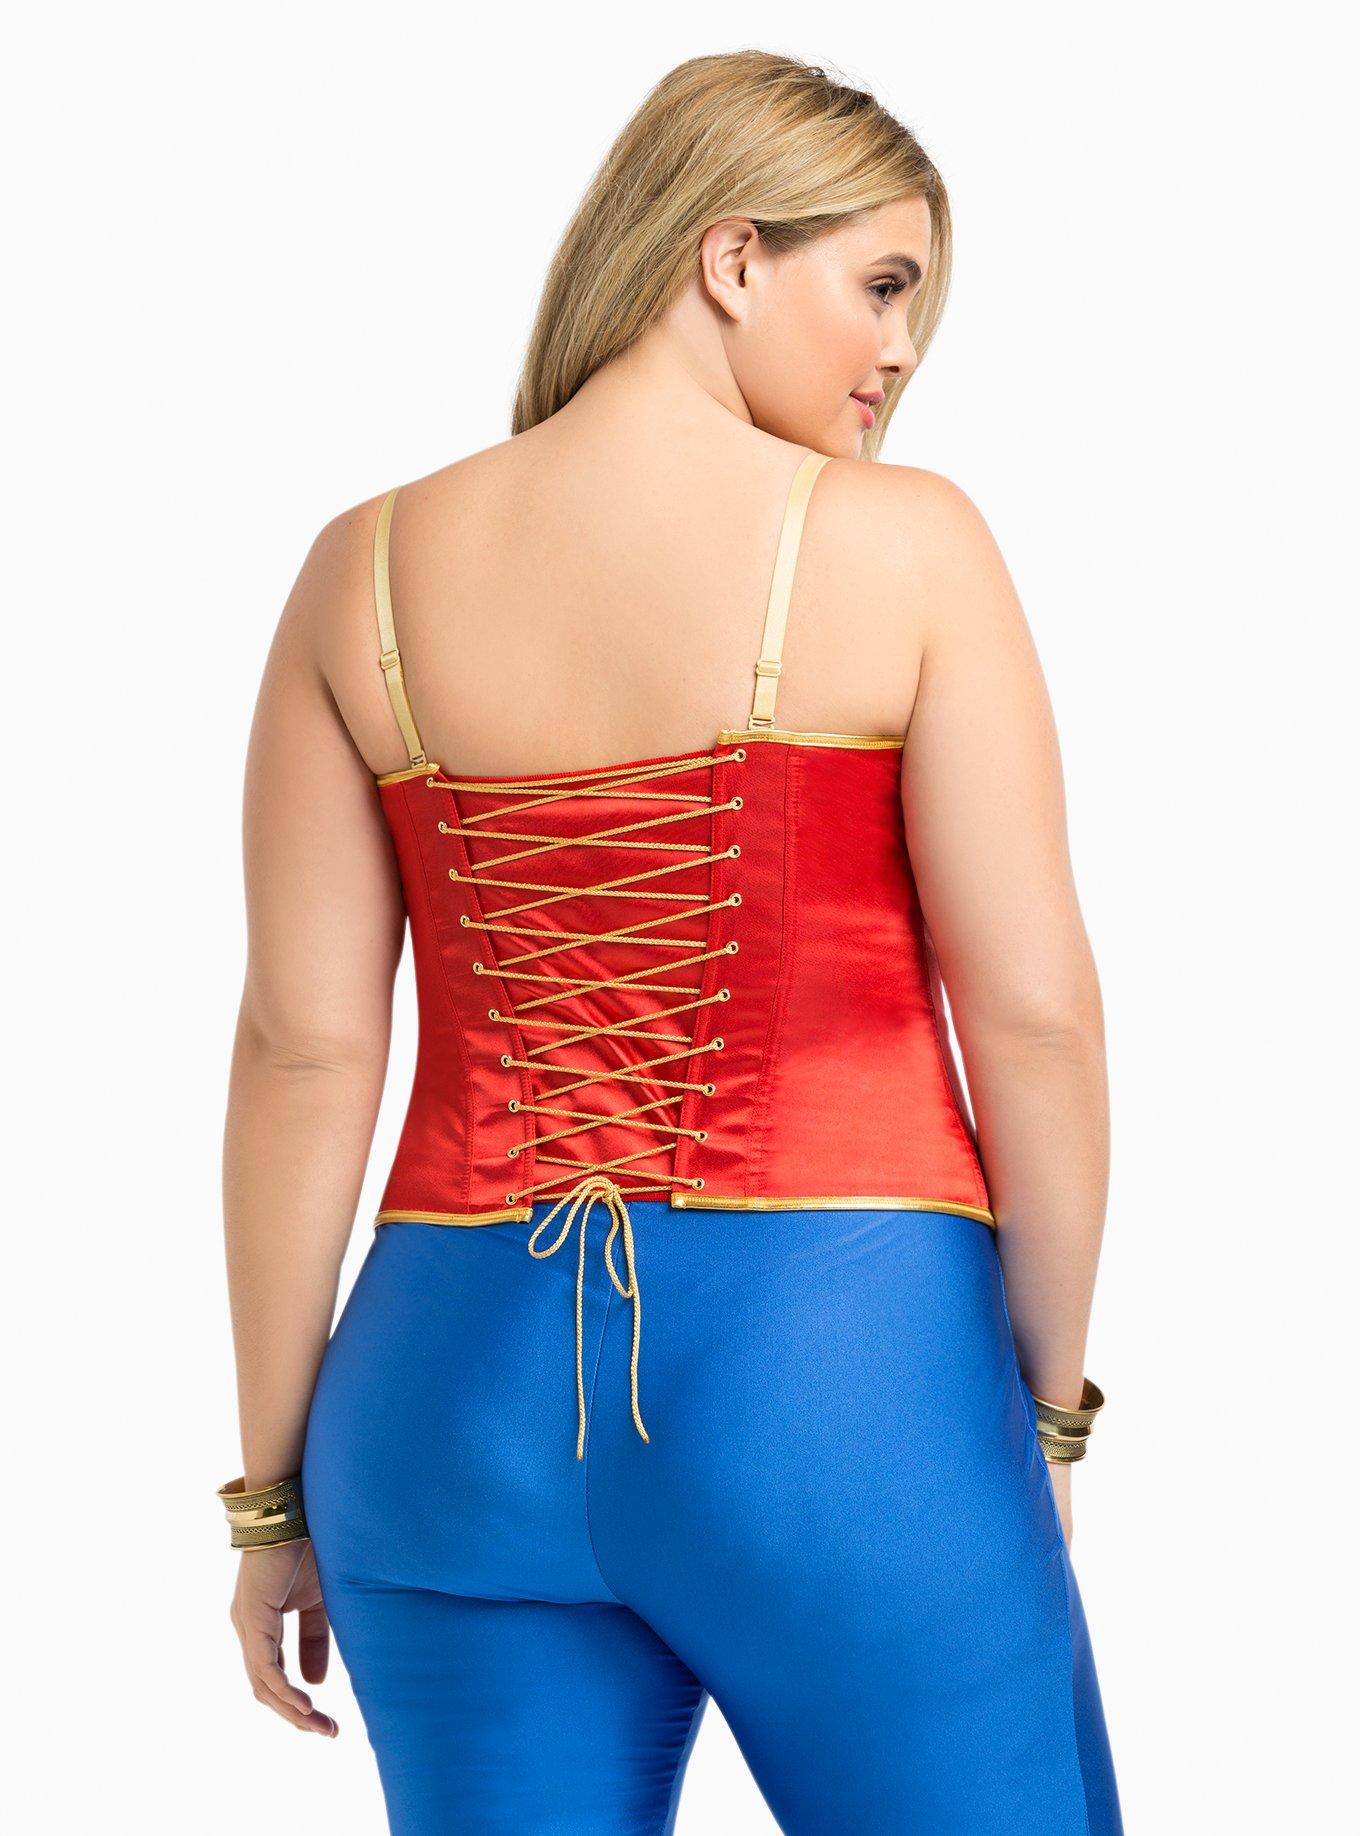 Plus Size - Wonder Woman Lace Up Front Cosplay Bustier - Torrid